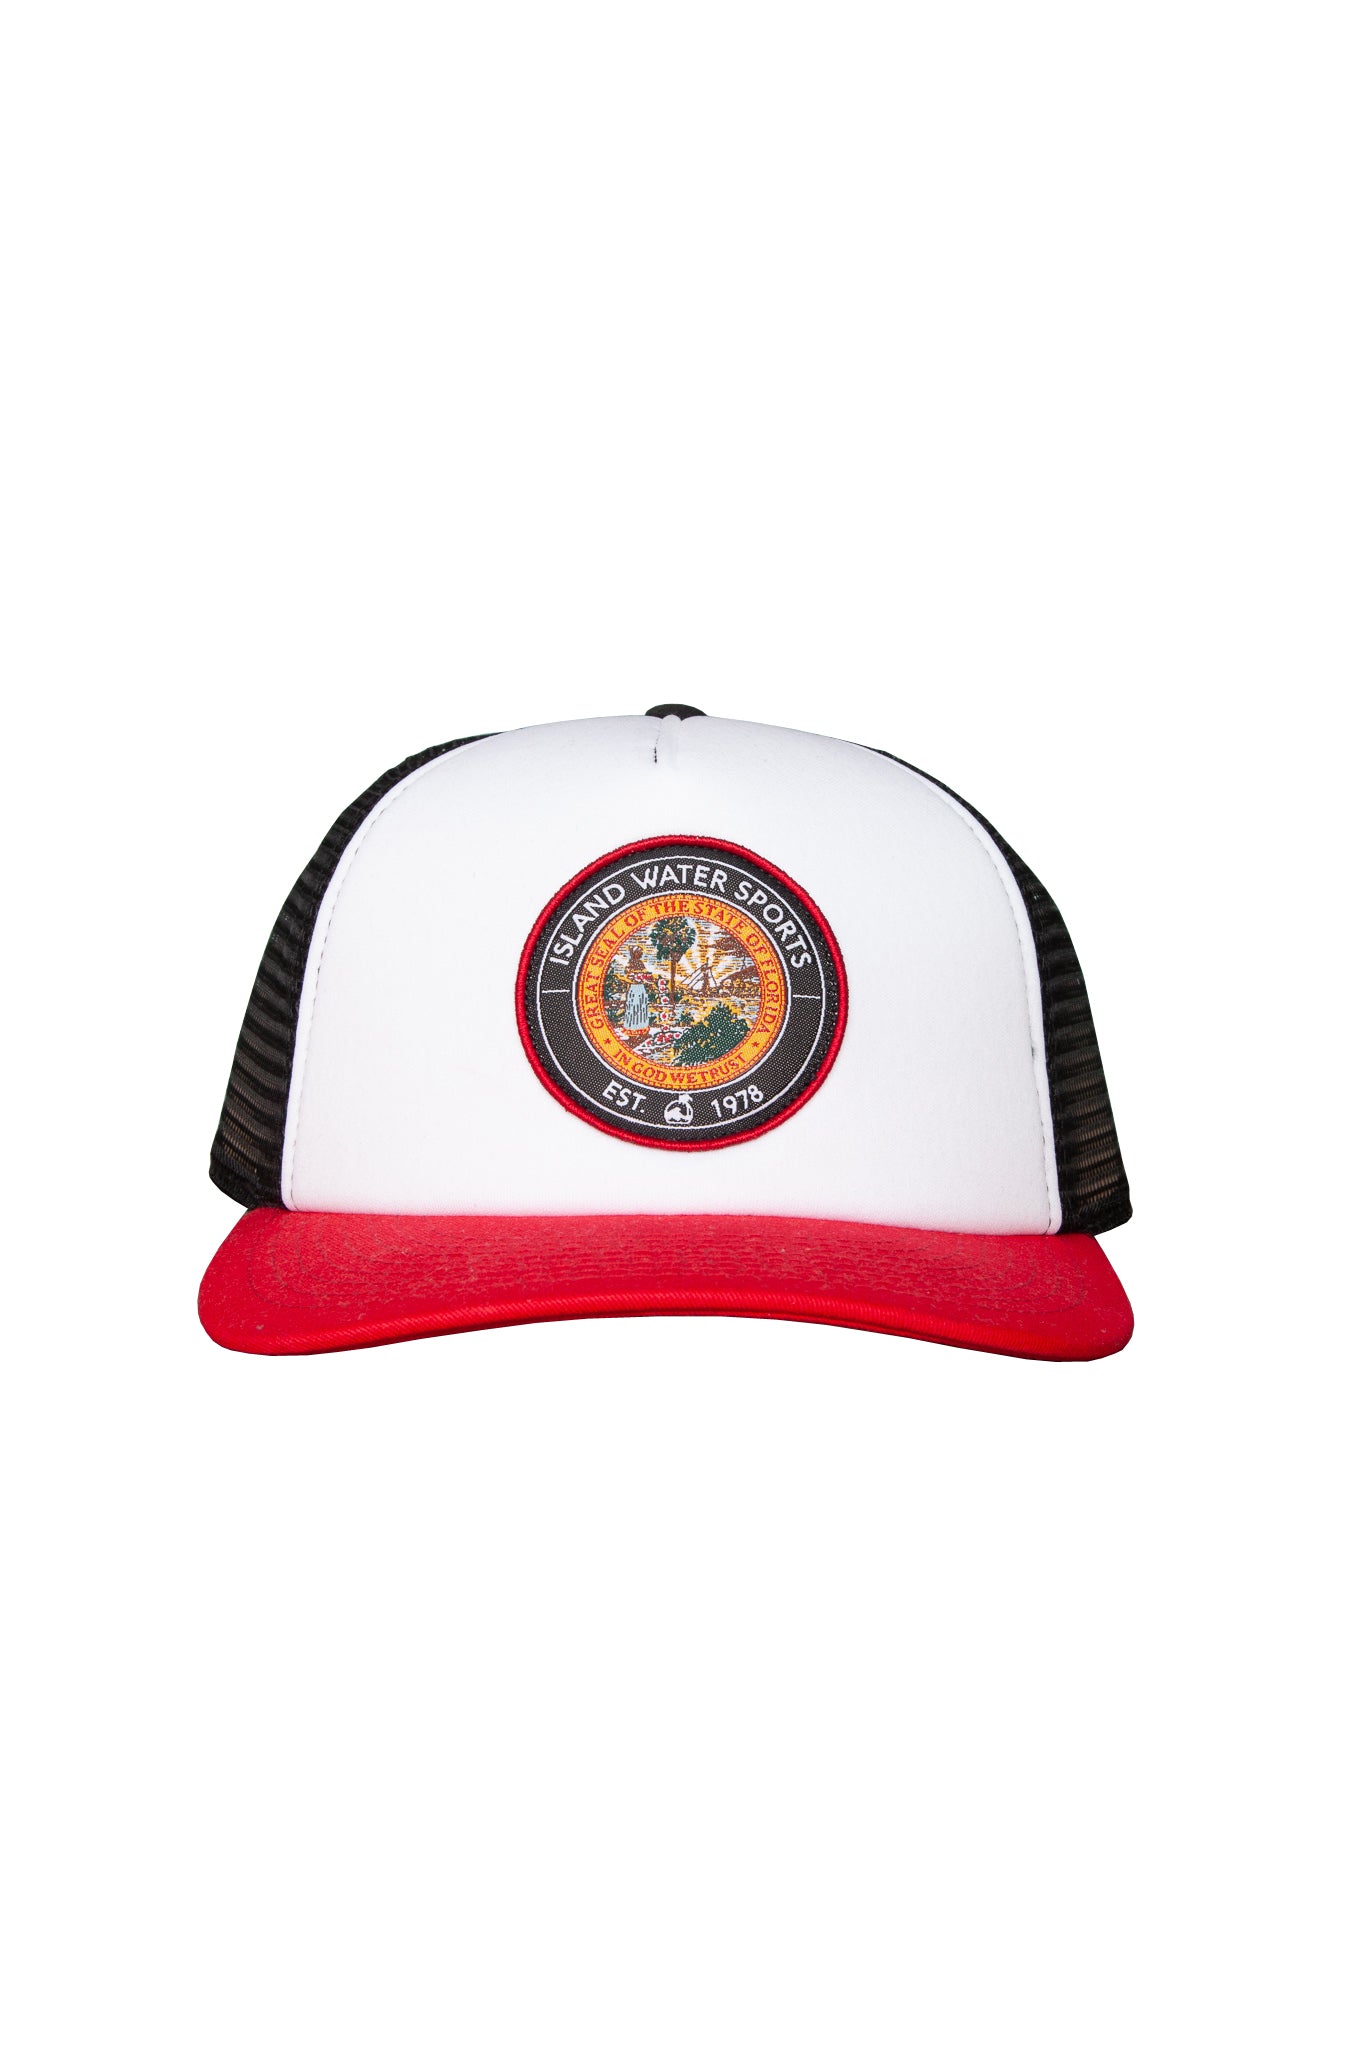 Island Water Sports Seal of Florida Trucker Hat Red/White/Black OS